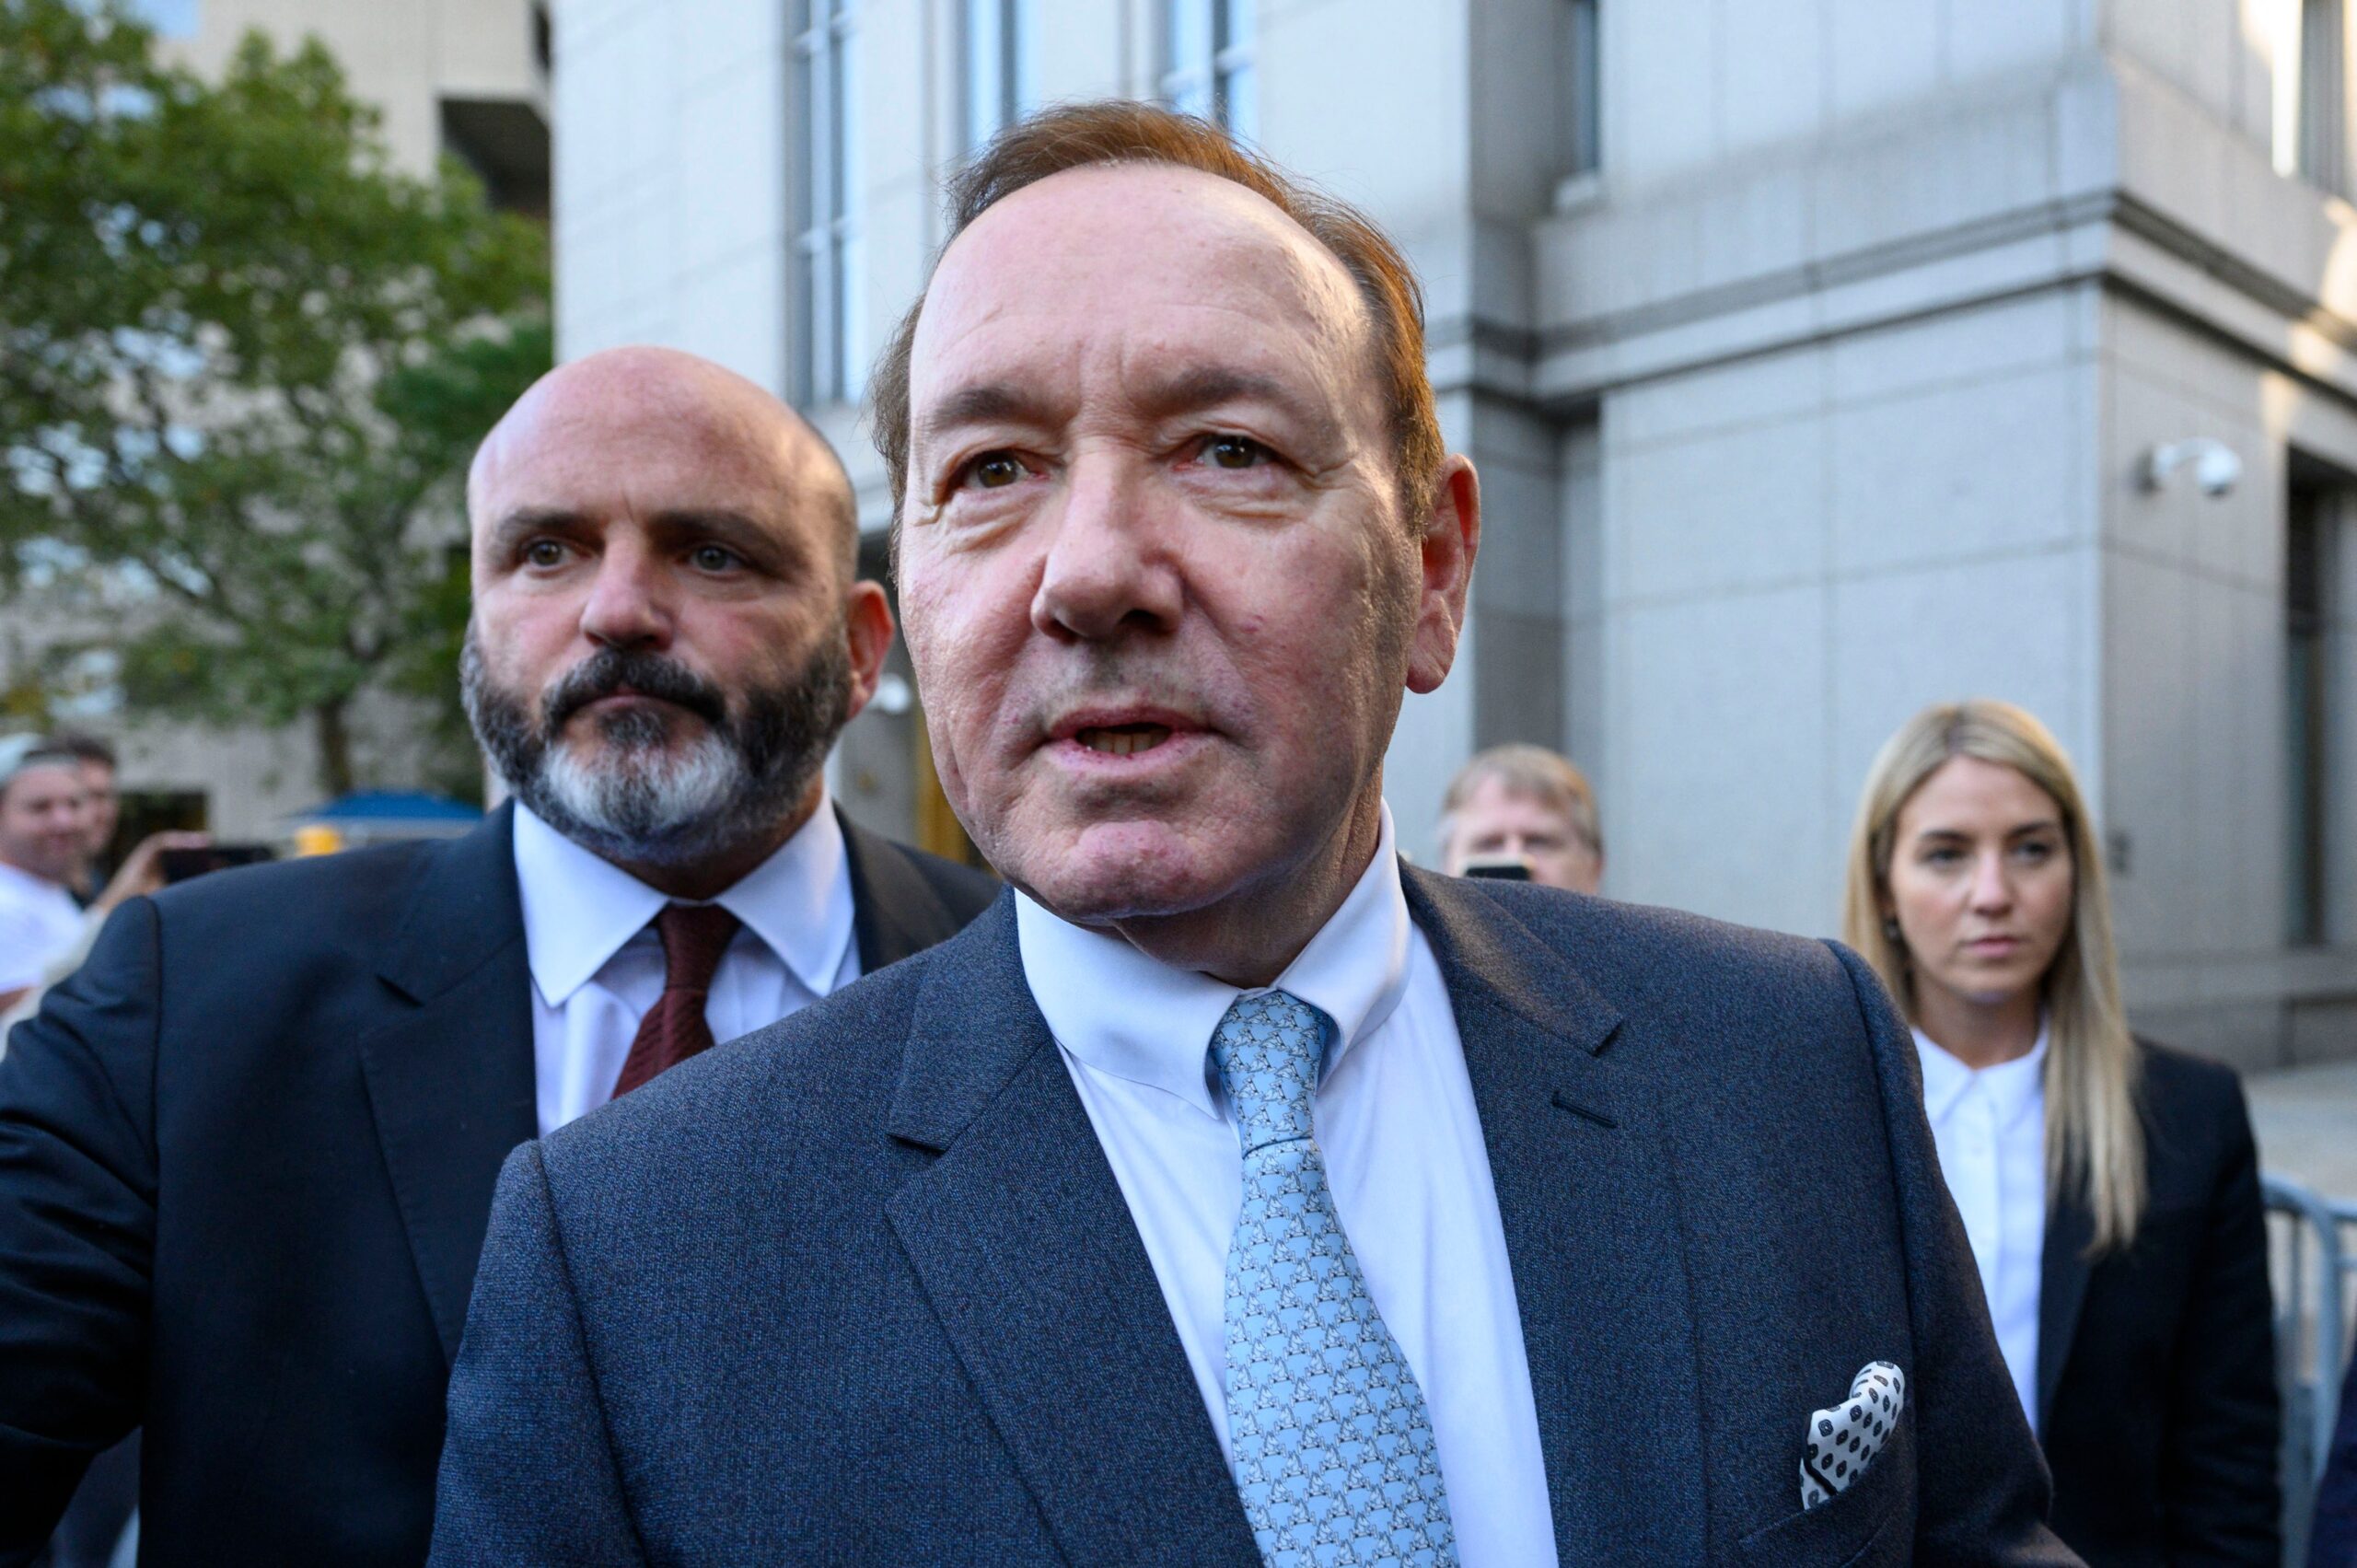 Kevin Spacey cleared of sexual assault charges in UK trial.